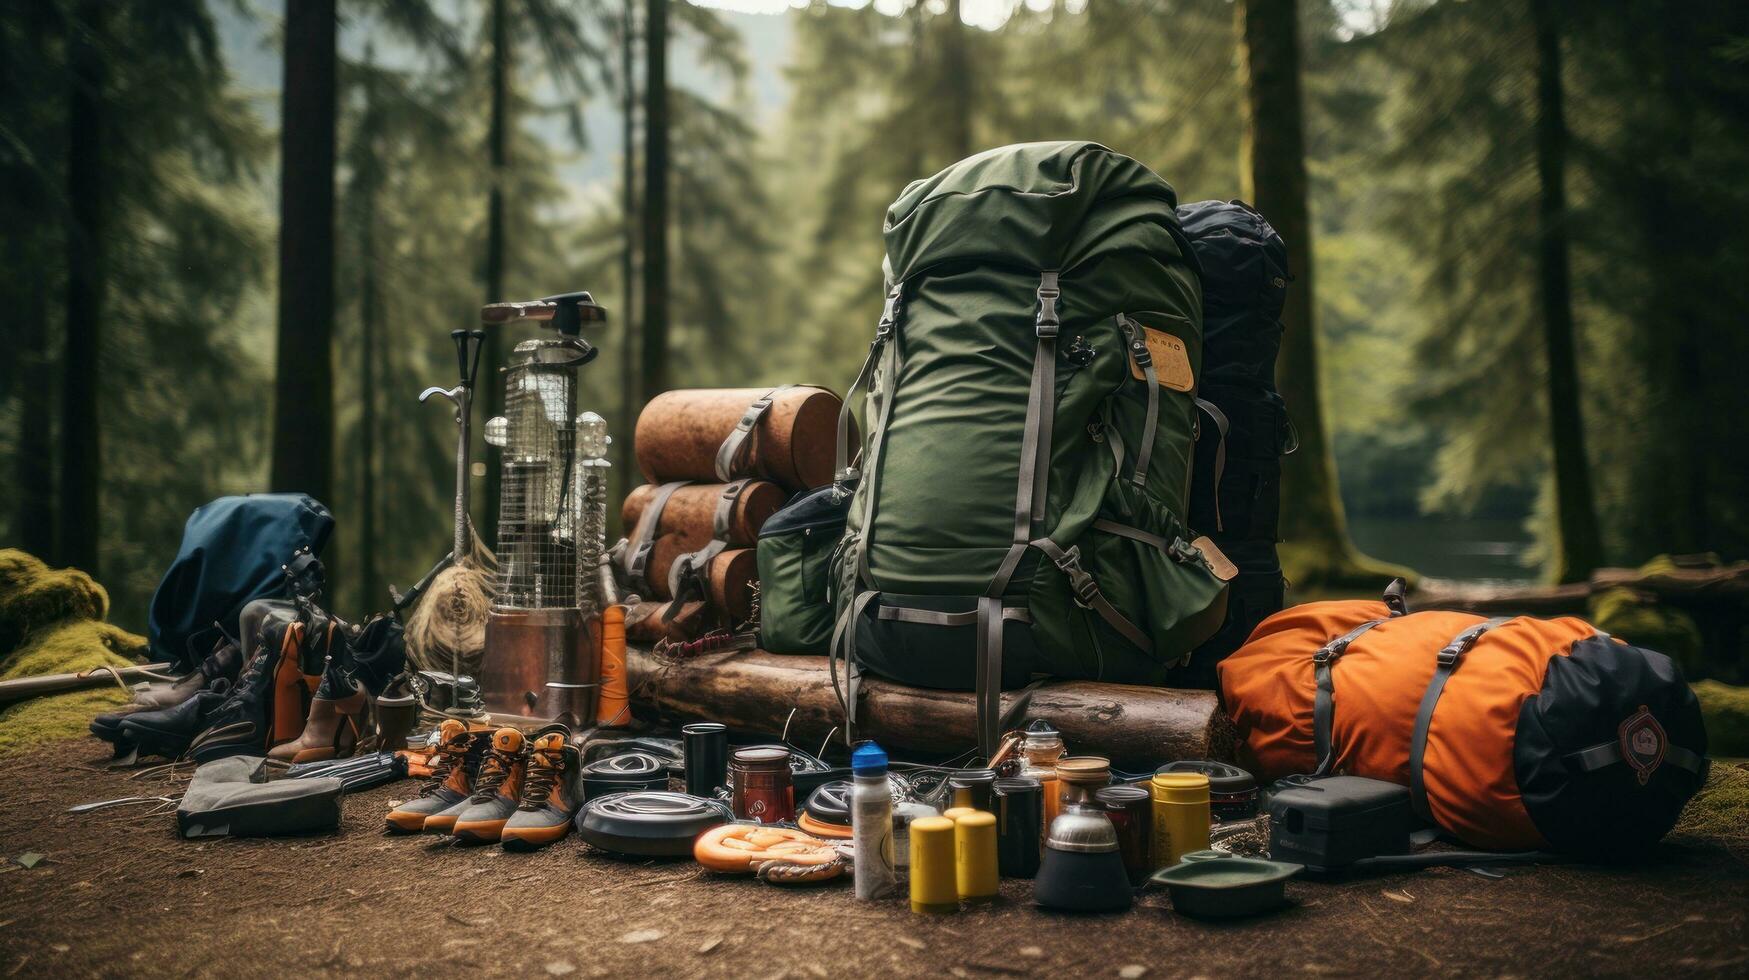 7 ways to make the most of your outdoor budget (and where to get gear for free)